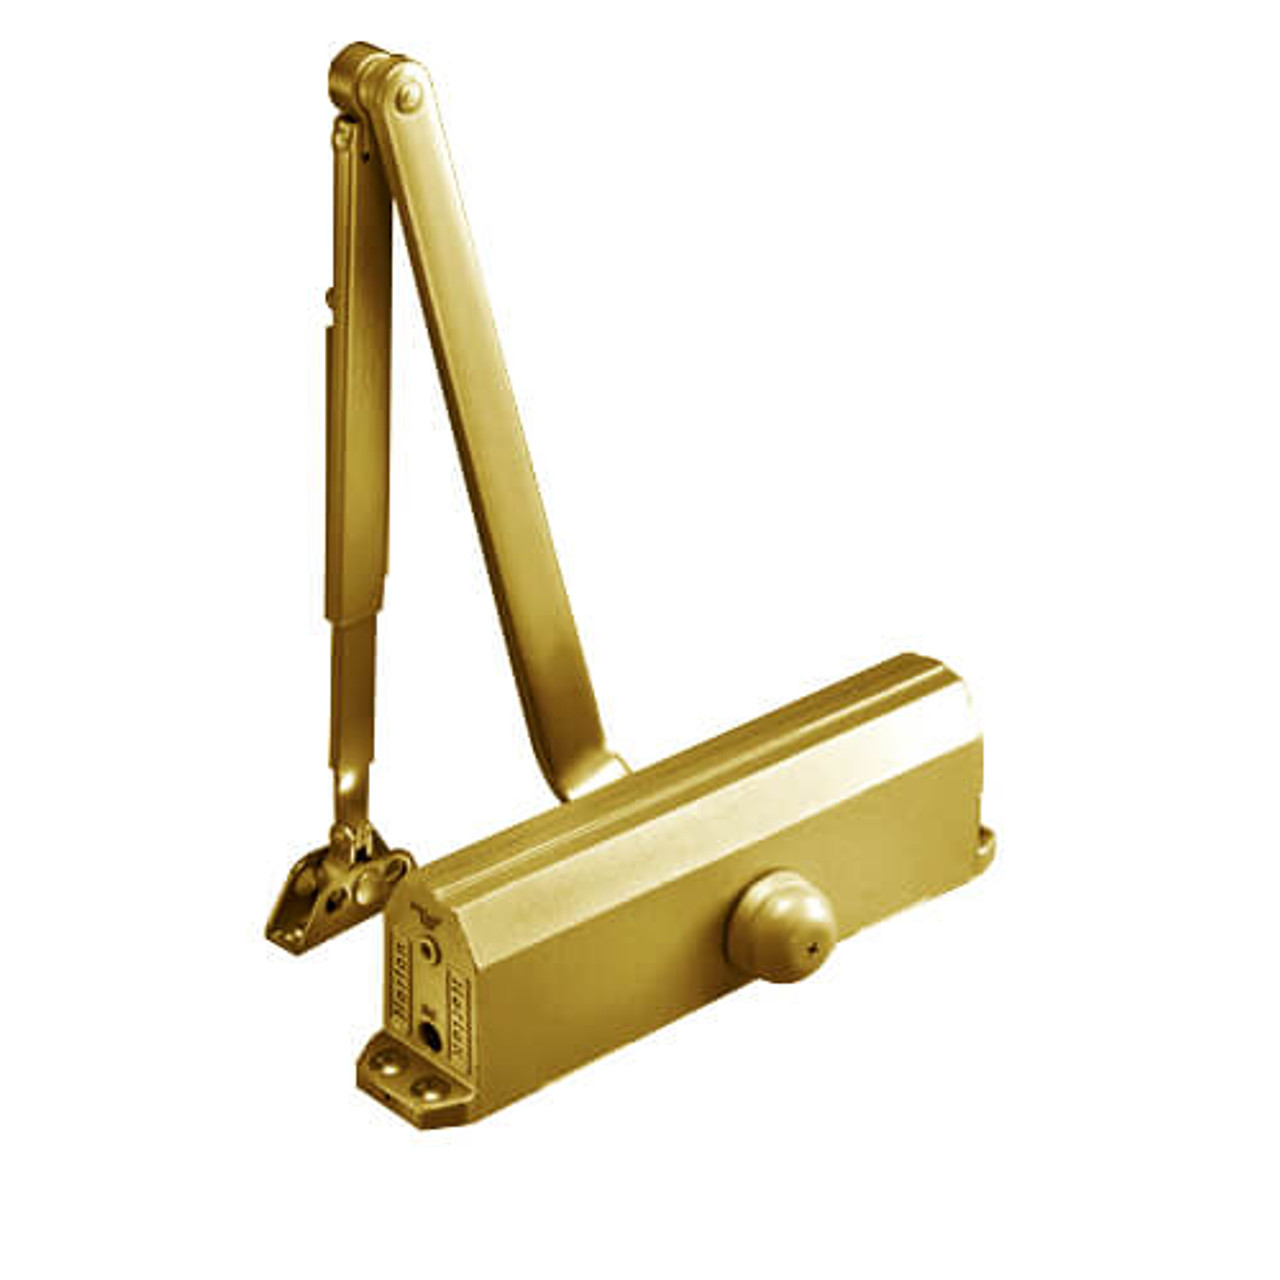 1601P-696 Norton 1600 Series Adjustable Door Closer with Cover in Satin Brass Painted Finish